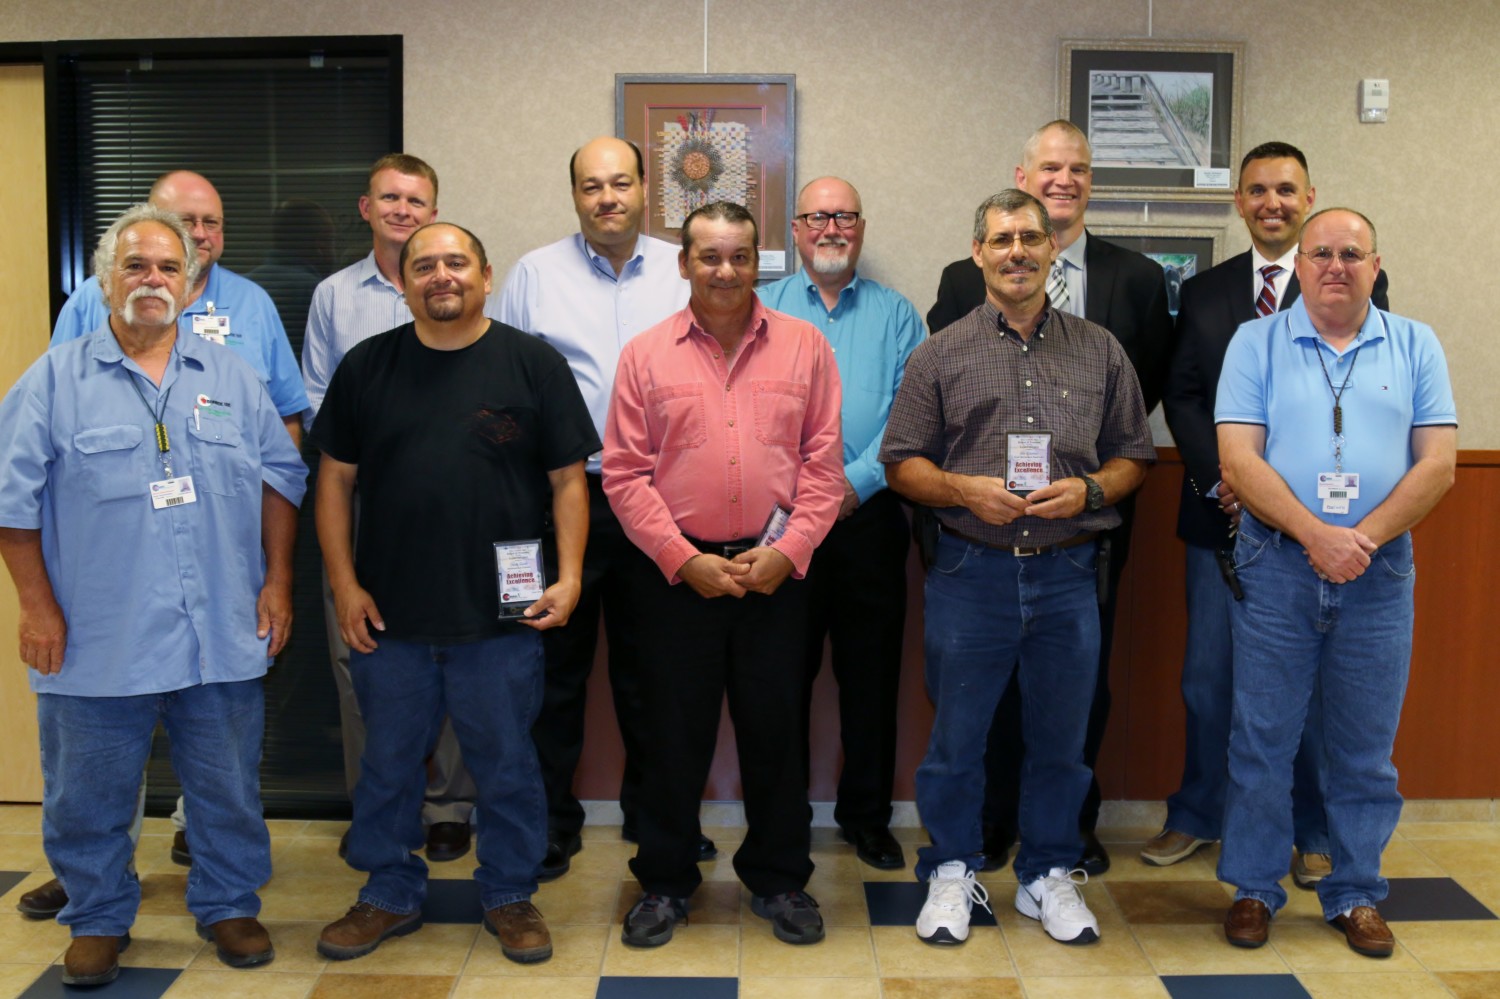 Maintenance and custodial staff receive awards